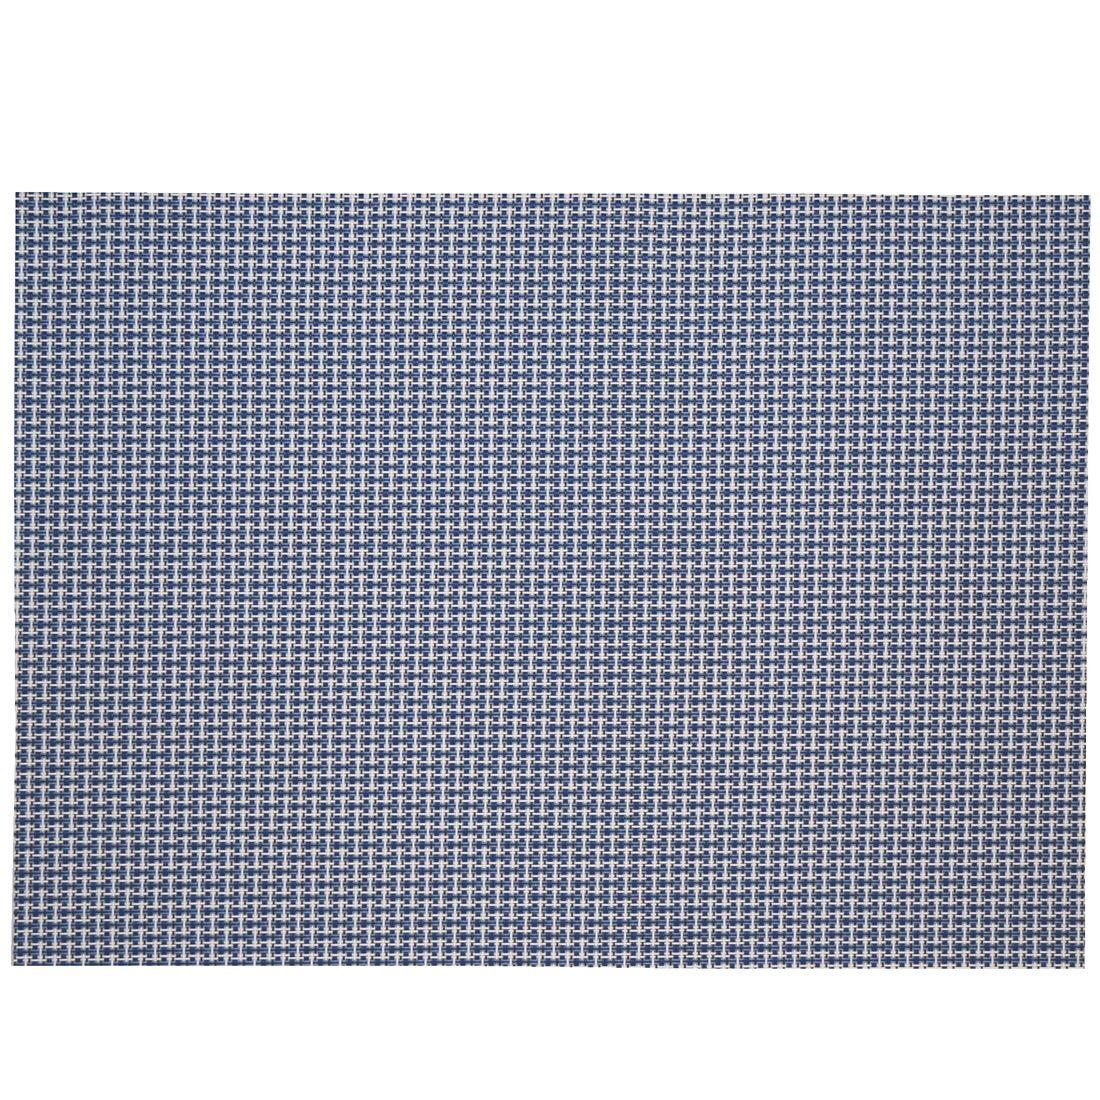 Rectangular Blue and White Logo - Rectangle Placemats: Blue White Wipe Clean Rectangle Shaped Placemat